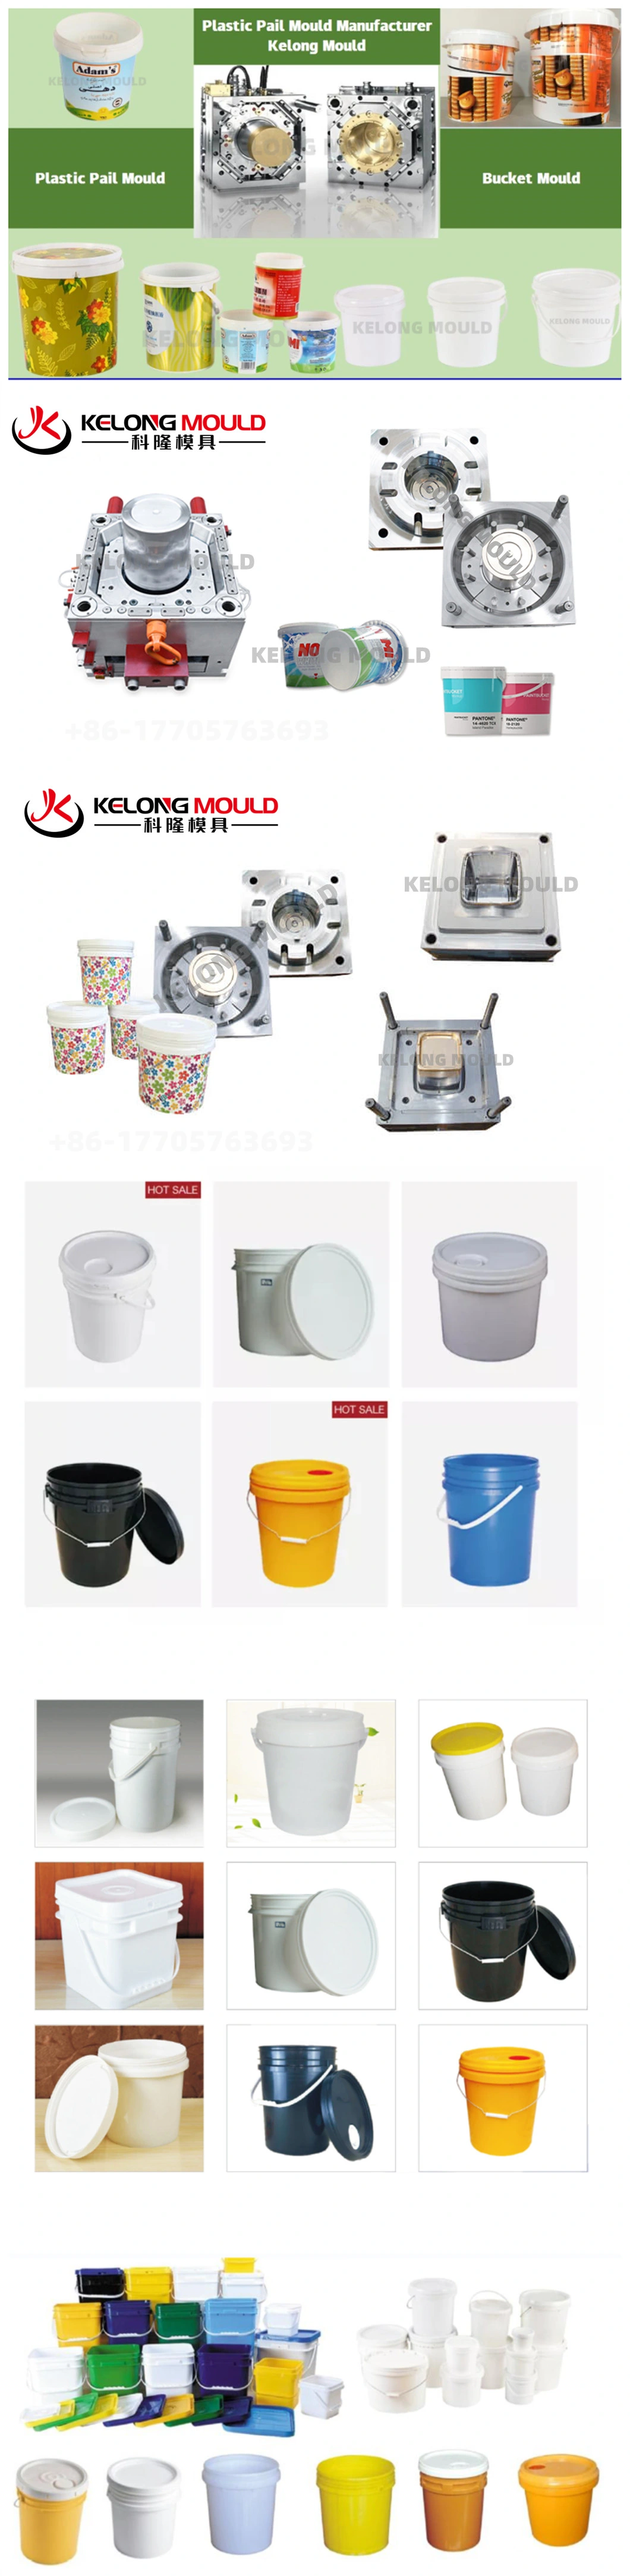 Plastic Oil Pure Water Bottle Blowing PP Bucket Dustbin Tray Barrel Drum Box Can Jar Cup Container Handle Cap Cover Lid Pet Preform Injection Inject Mold Mould